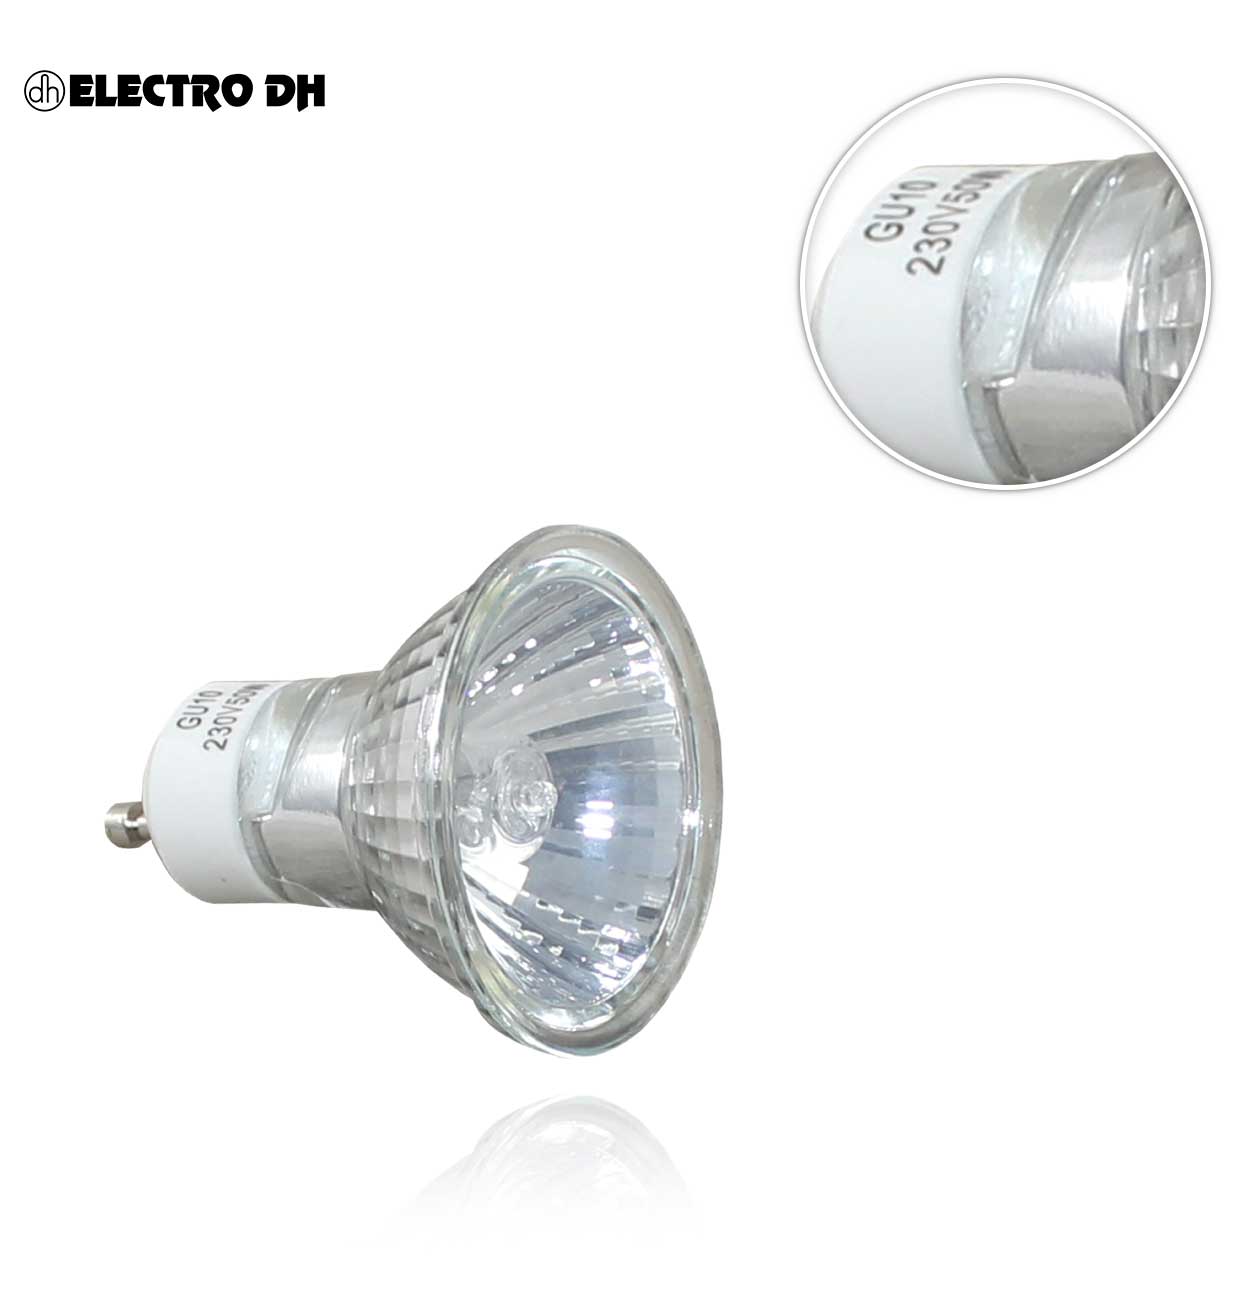 MR16 12V 50W STANDARD DICROICA HALOGEN BULB with protective glass